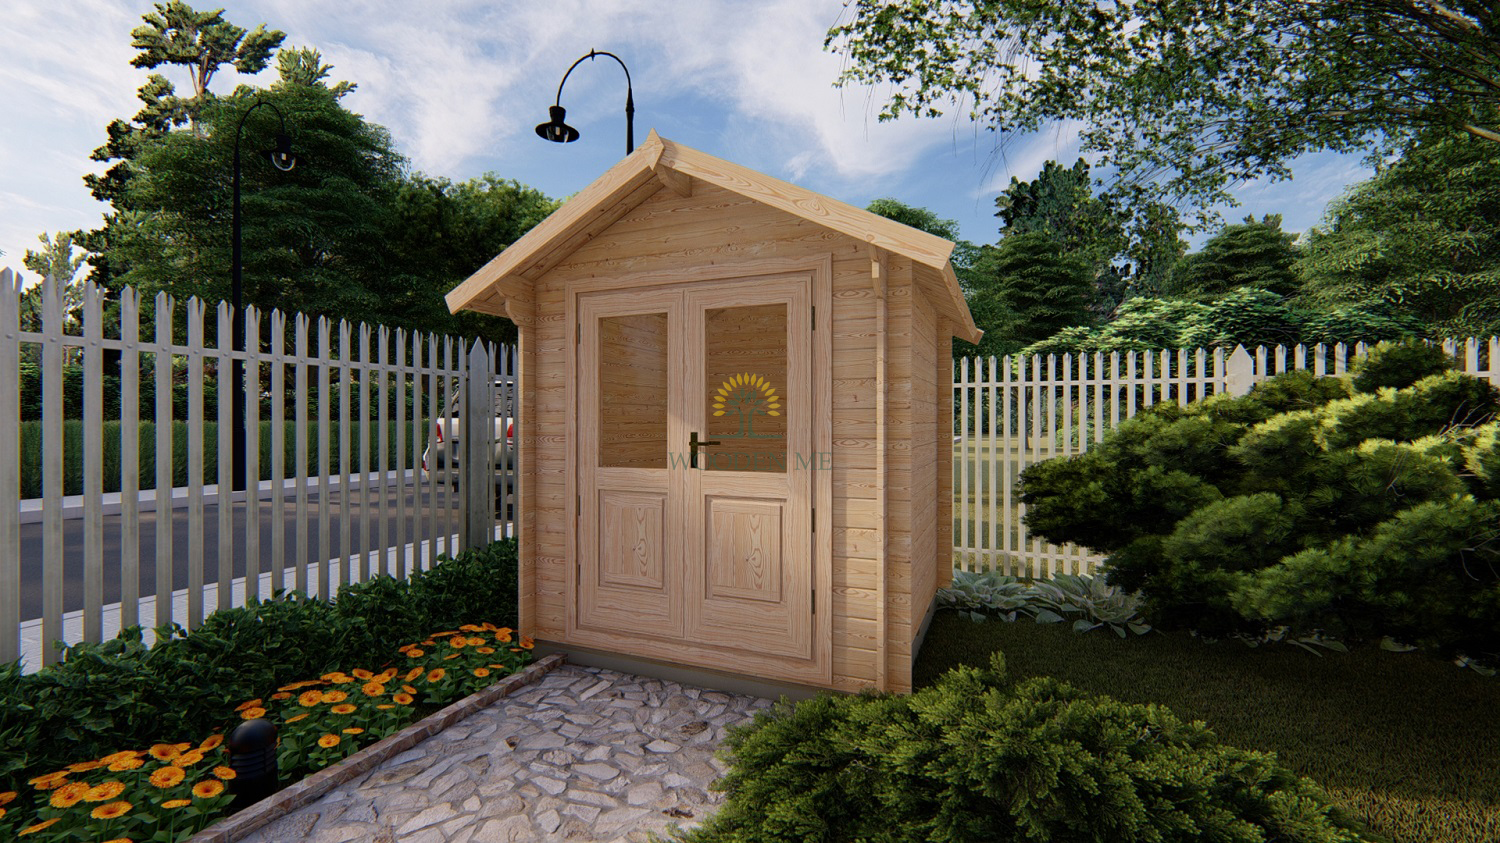 Garden shed BEDFORD 2.2 x 2.2m, 28mm